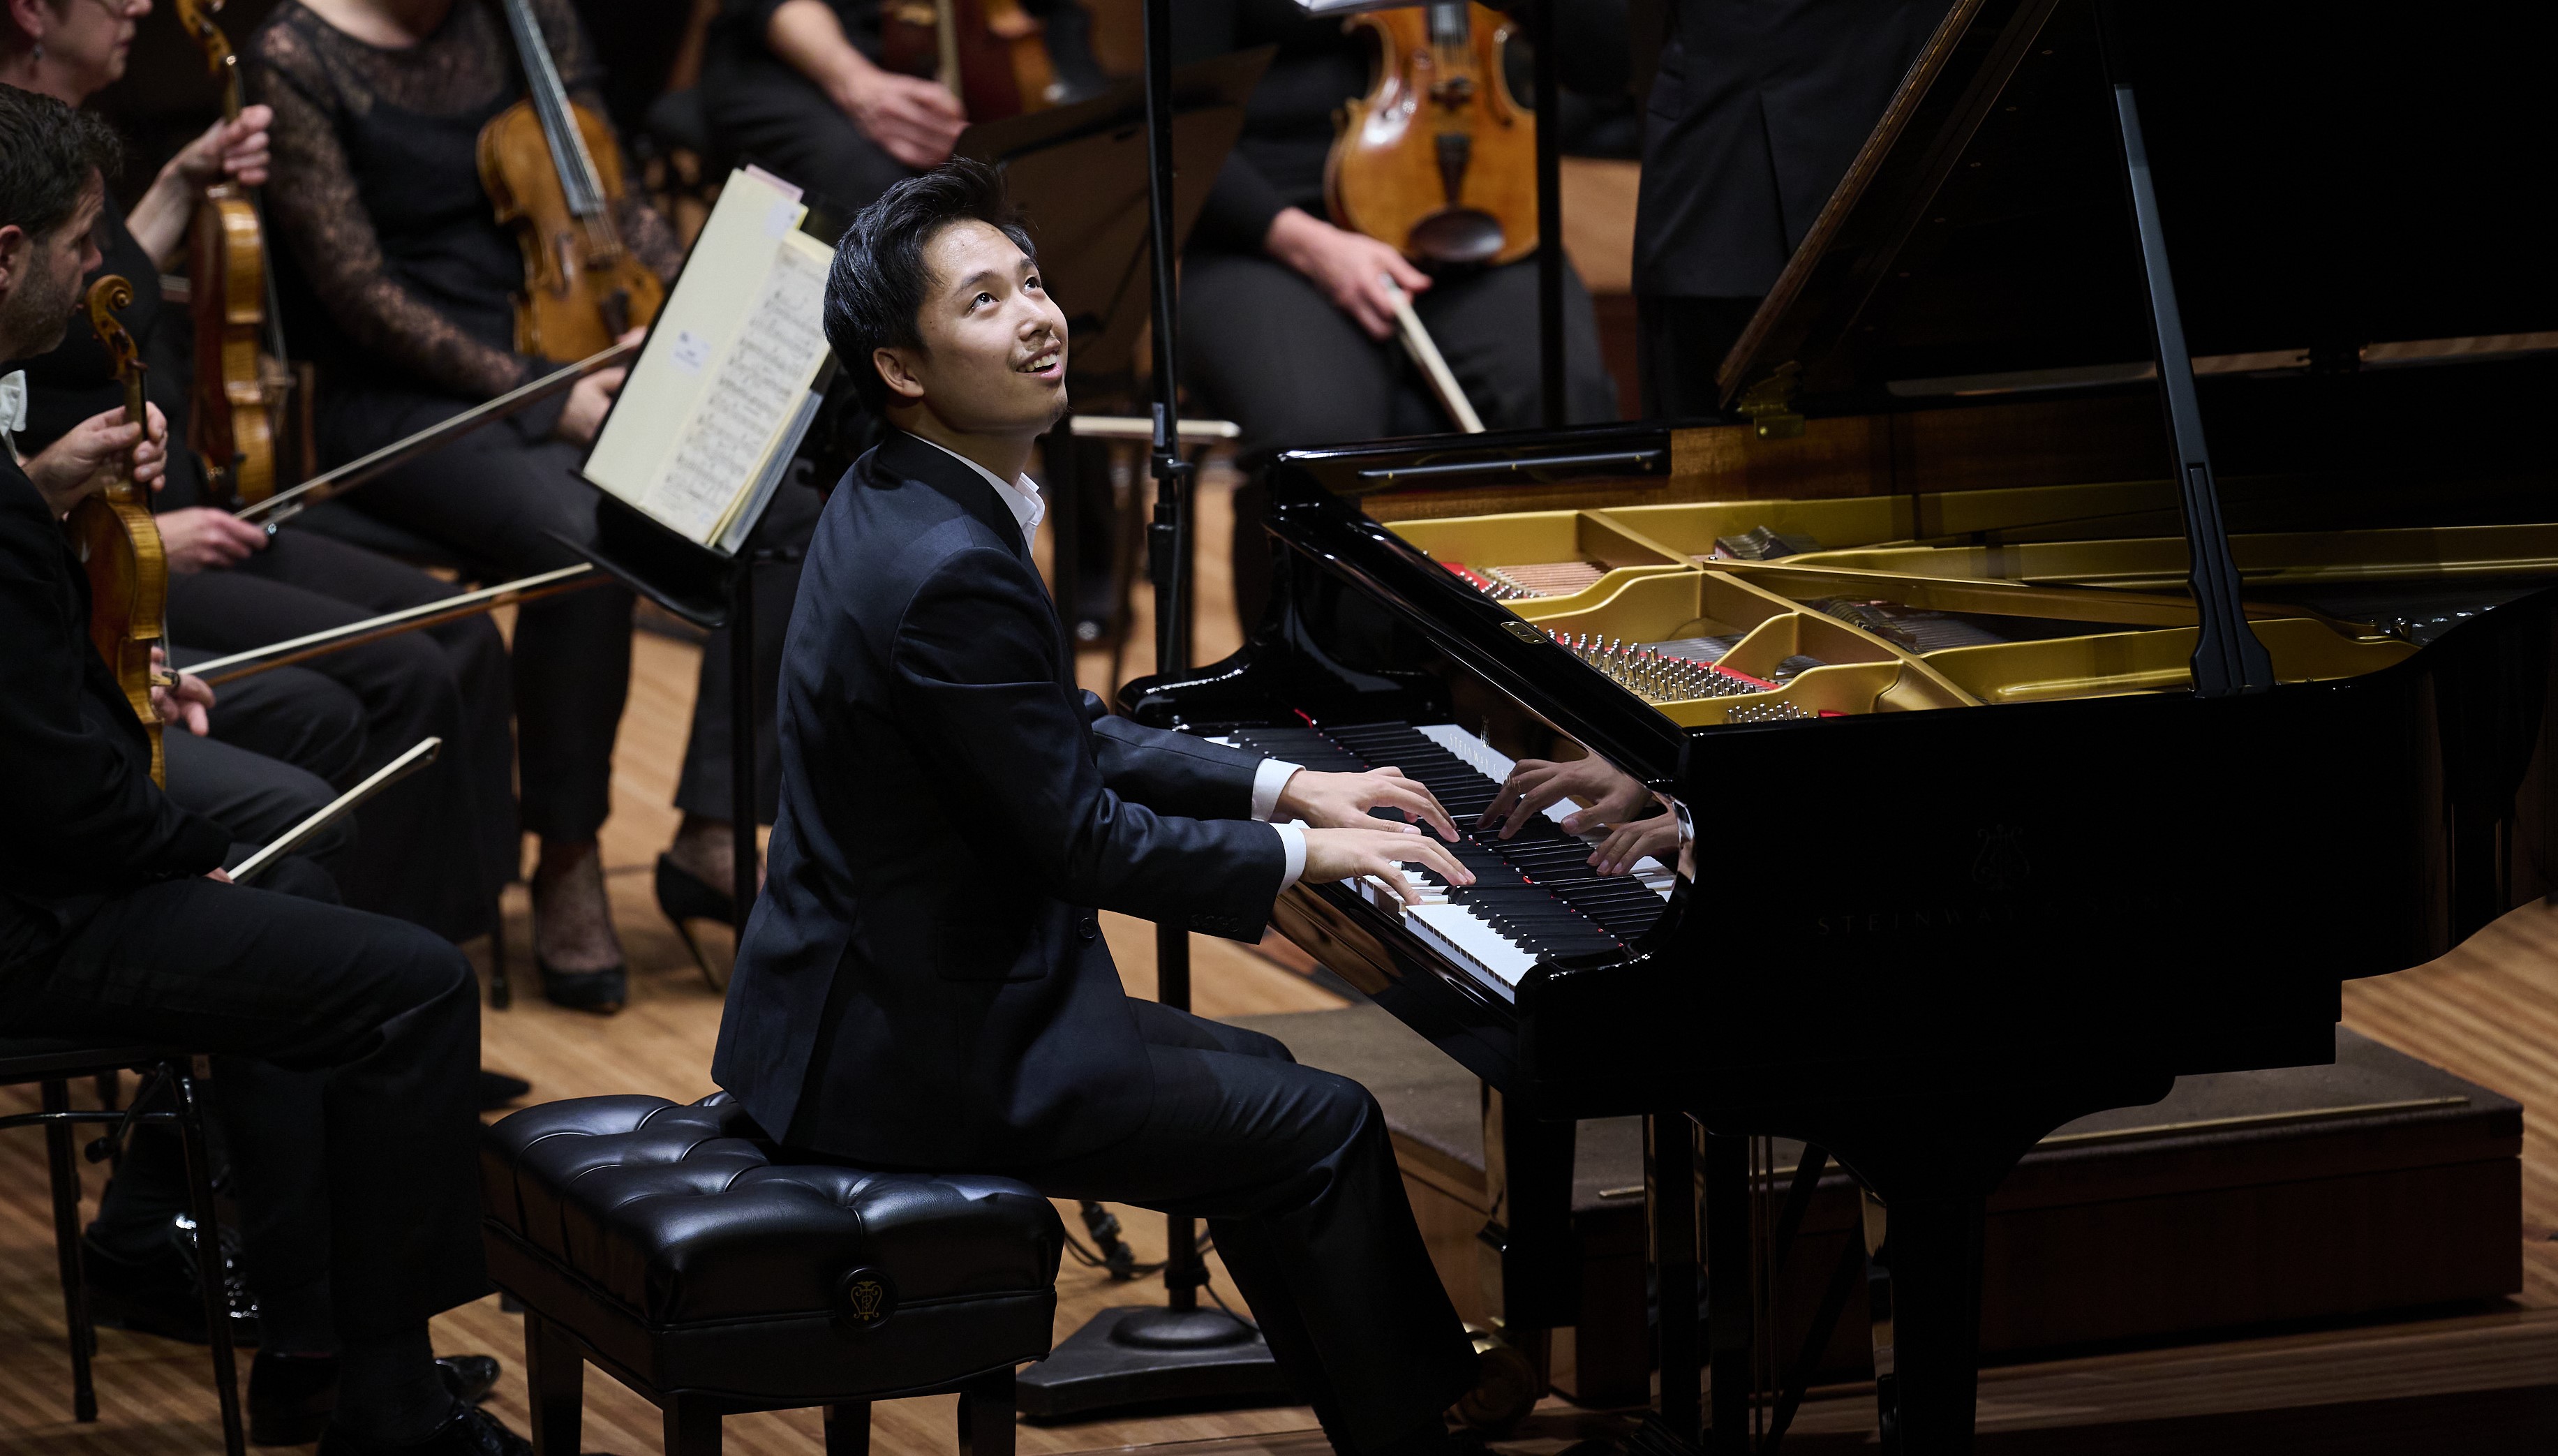 A Korean man wearing a black suit sits at a grand piano looking up and smiling